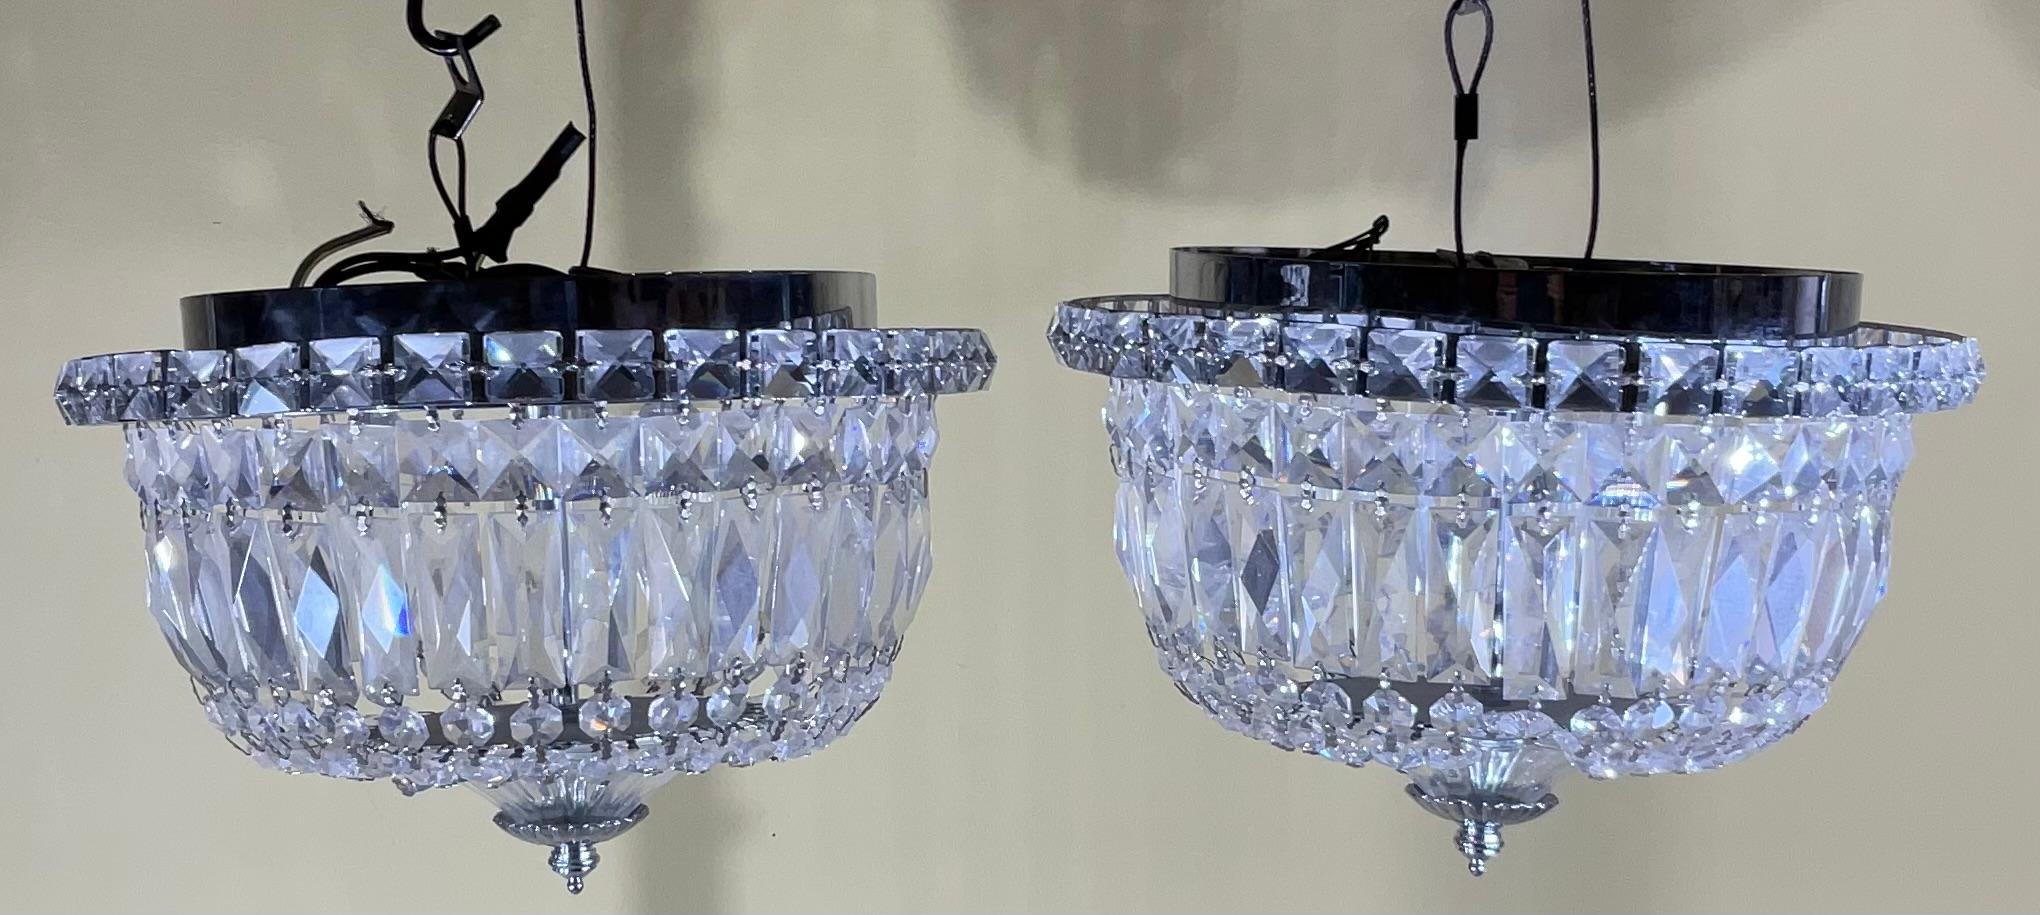 Pair of 1940's Hollywood style Cut Crystal drop-down flush mount dome chandelier with crystal and silvered fittings. This elegant flush mount chandelier features a band of numerous square diamond cut crystals that are attached to its silvered